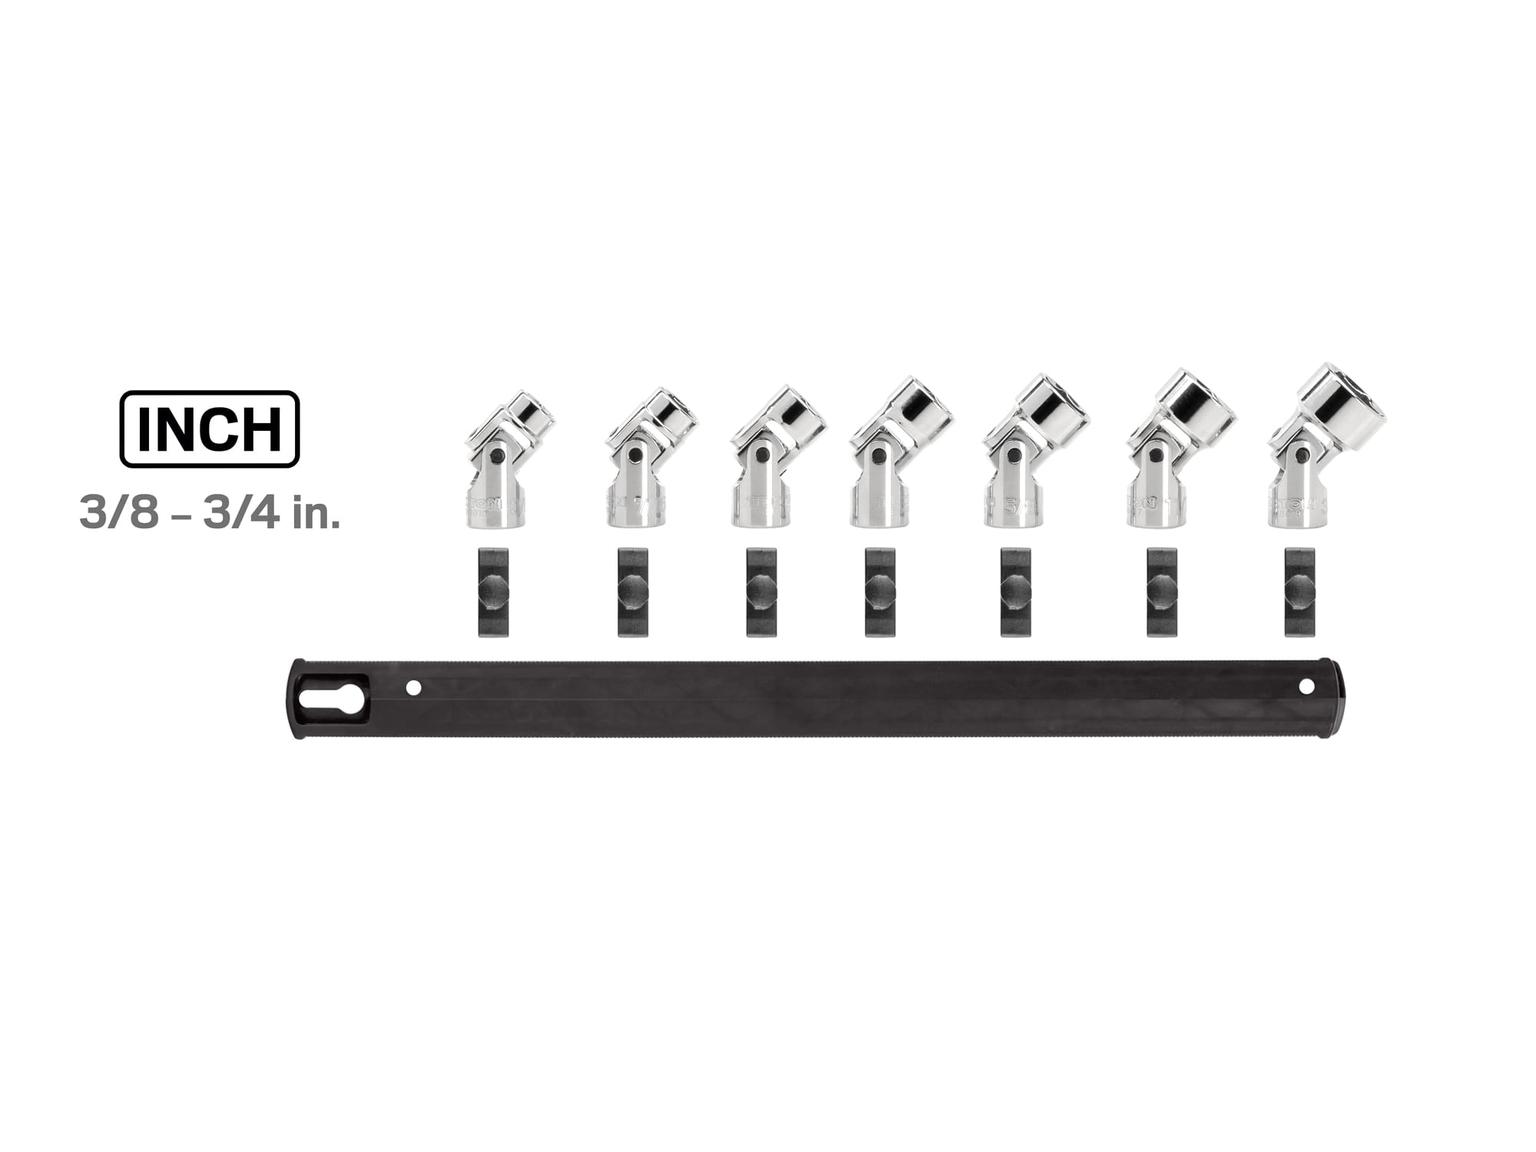 TEKTON SHD91118-T 3/8 Inch Drive Universal Joint Socket Set with Rails, 7-Piece (3/8-3/4 in.)